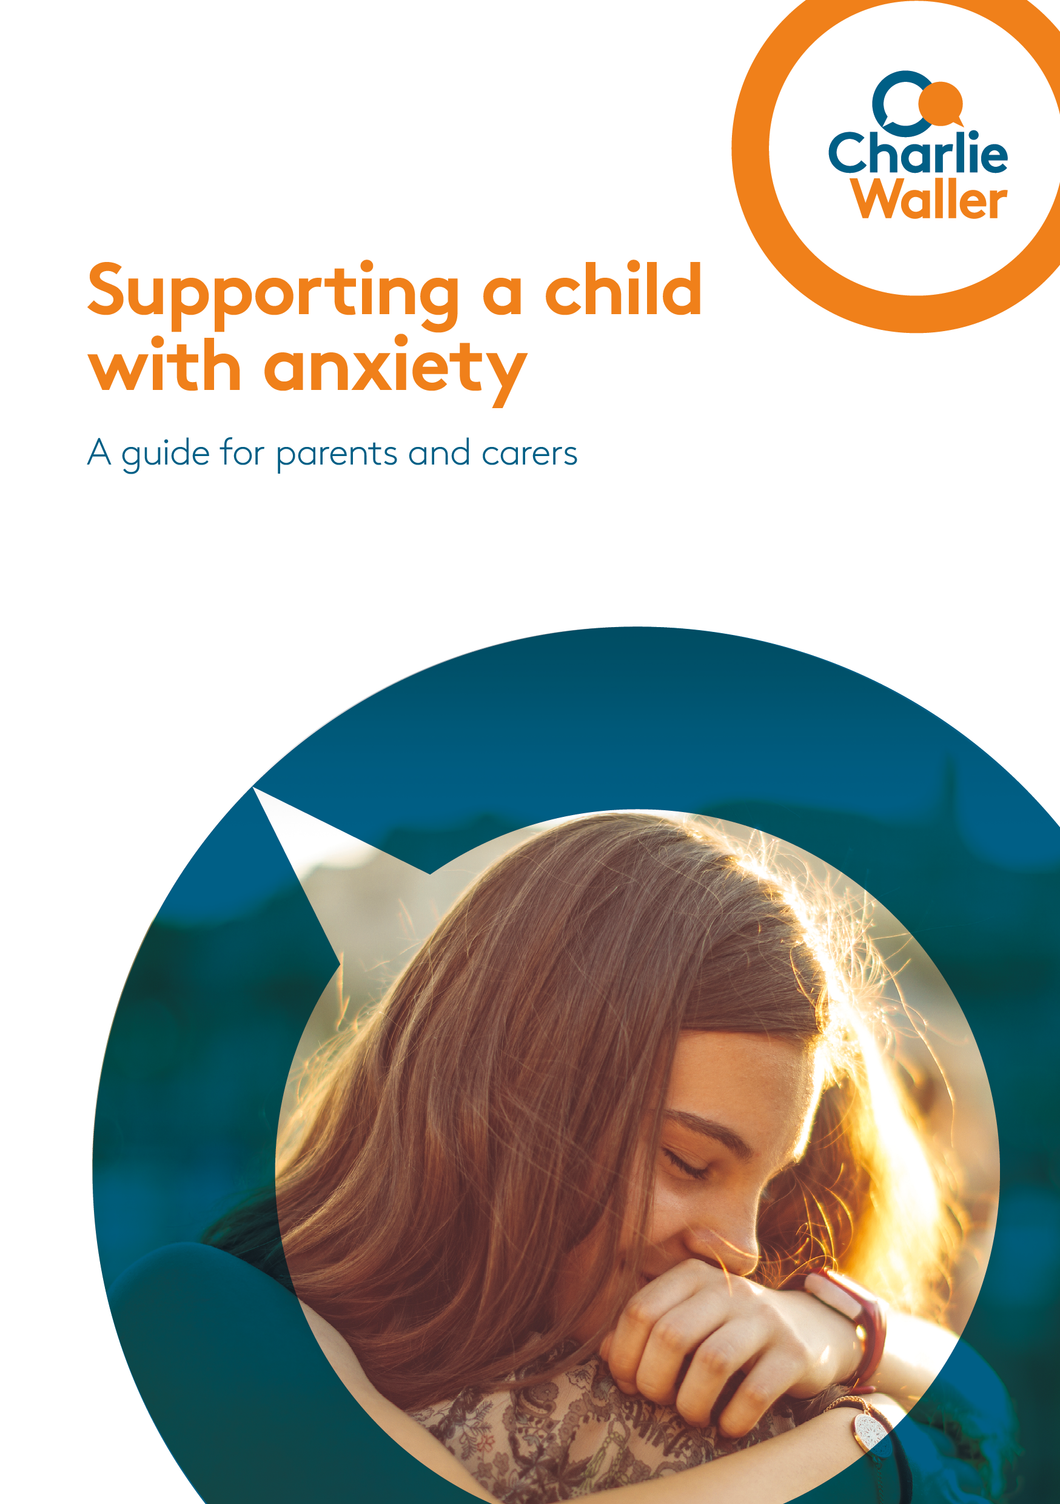 Supporting a child with anxiety